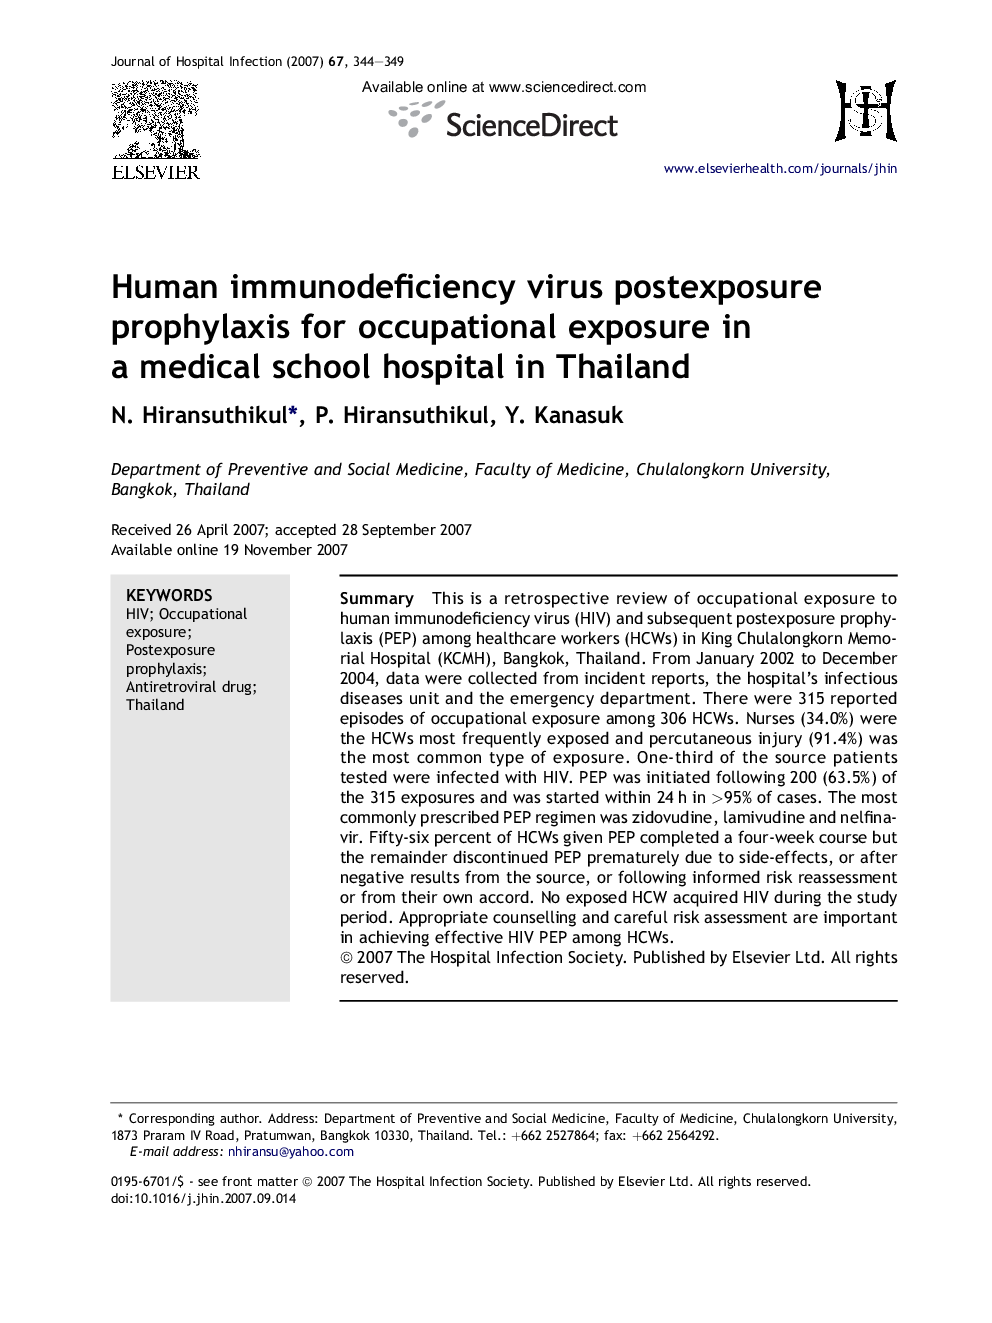 Human immunodeficiency virus postexposure prophylaxis for occupational exposure in a medical school hospital in Thailand